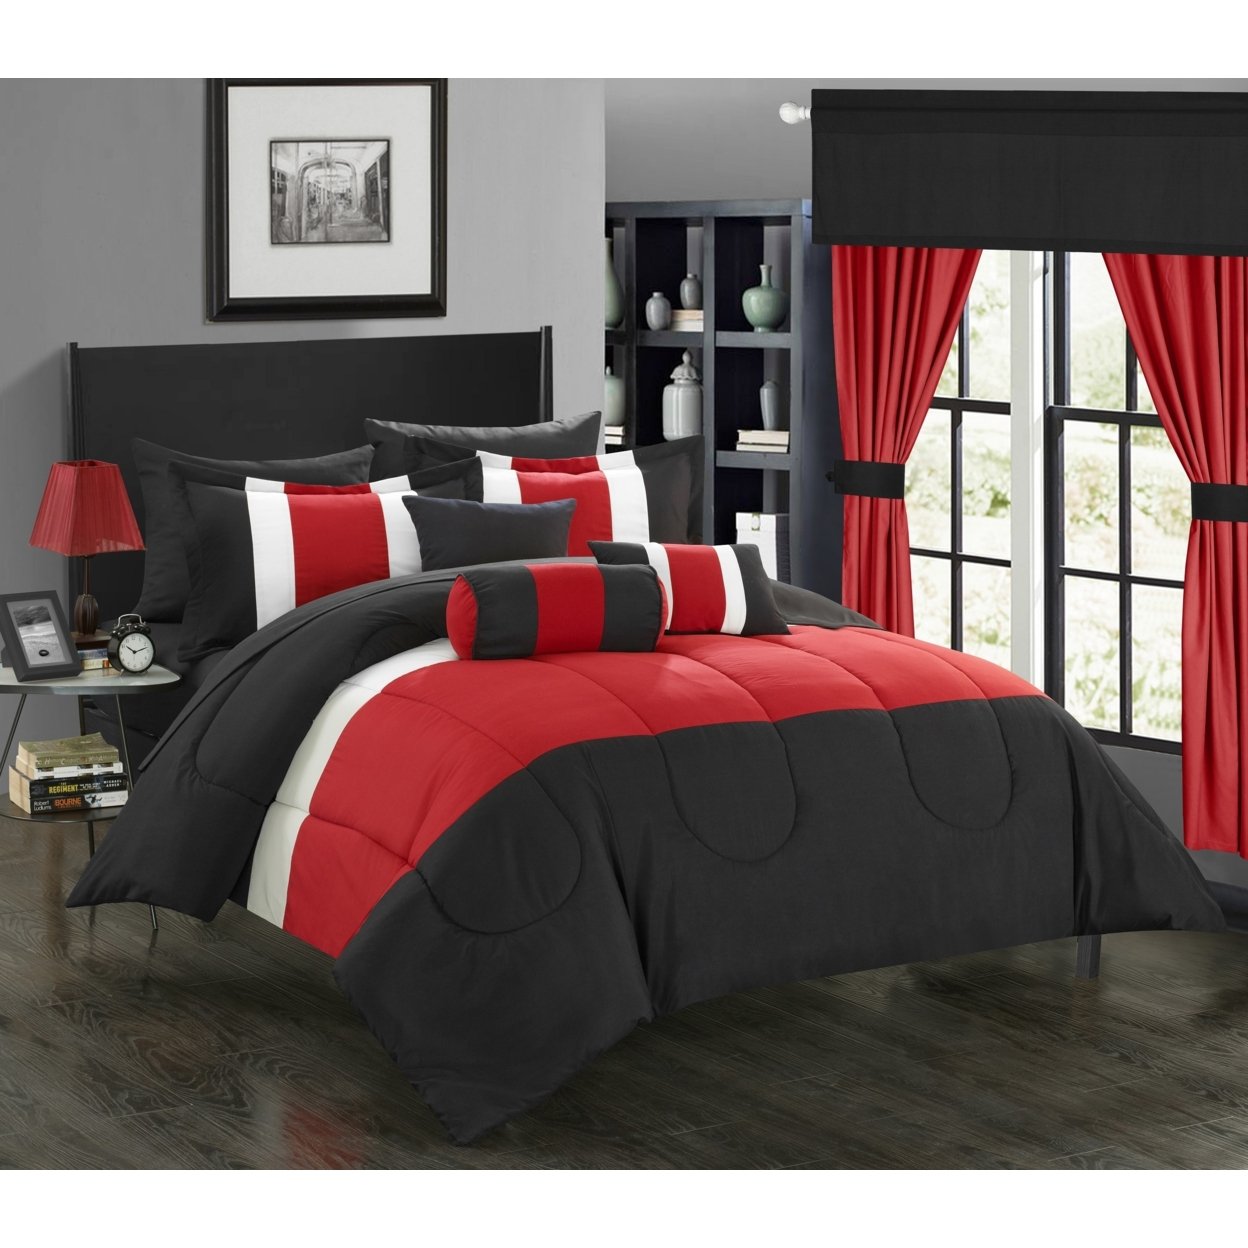 Chic Home 20 Piece Wanstead Complete Pieced Color Block Bedding, Sheets, Window Panel Collection Bed In A Bag Comforter Set - Red, King